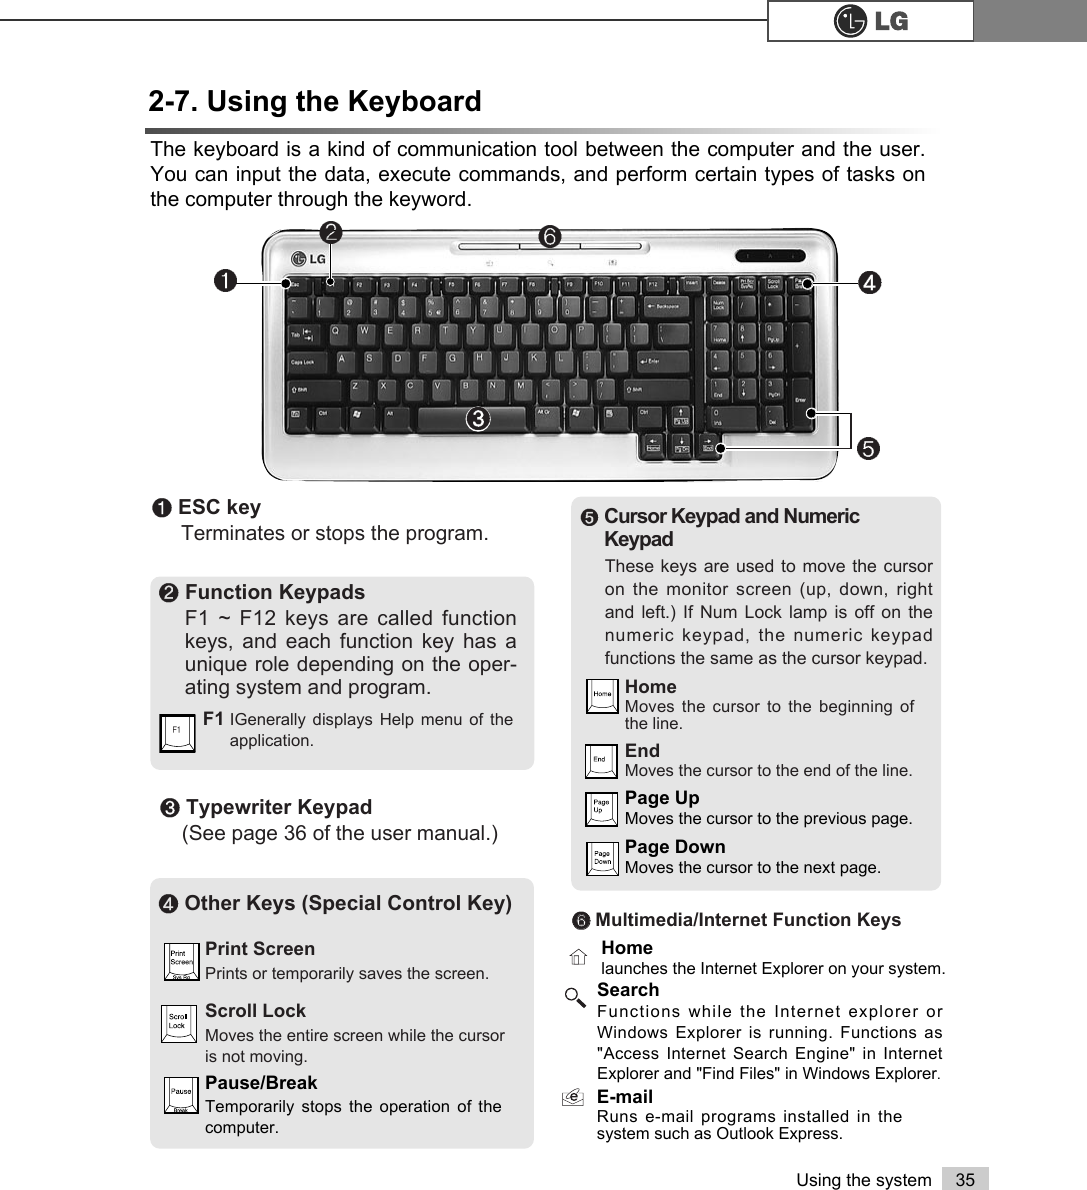 35Using the system2-7. Using the KeyboardThe keyboard is a kind of communication tool between the computer and the user.You can input the data, execute commands, and perform certain types of tasks onthe computer through the keyword.ℚTypewriter Keypad(See page 36 of the user manual.) ℘ESC keyTerminates or stops the program.ℛOther Keys (Special Control Key)Scroll LockMoves the entire screen while the cursoris not moving.Print ScreenPrints or temporarily saves the screen.Pause/BreakTemporarily stops the operation of thecomputer.ℙFunction KeypadsF1 ~ F12 keys are called functionkeys, and each function key has aunique role depending on the oper-ating system and program.F1 IGenerally displays Help menu of theapplication.)℘ℛℙℝℚℝℝMultimedia/Internet Function KeysℜCursor Keypad and NumericKeypadThese keys are used to move the cursoron the monitor screen (up, down, rightand left.) If Num Lock lamp is off on thenumeric keypad, the numeric keypadfunctions the same as the cursor keypad.EndMoves the cursor to the end of the line.HomeMoves the cursor to the beginning ofthe line.Page UpMoves the cursor to the previous page.Page DownMoves the cursor to the next page.Homelaunches the Internet Explorer on your system.SearchFunctions while the Internet explorer orWindows Explorer is running. Functions as&quot;Access Internet Search Engine&quot; in InternetExplorer and &quot;Find Files&quot; in Windows Explorer.E-mailRuns e-mail programs installed in thesystem such as Outlook Express.ℜ